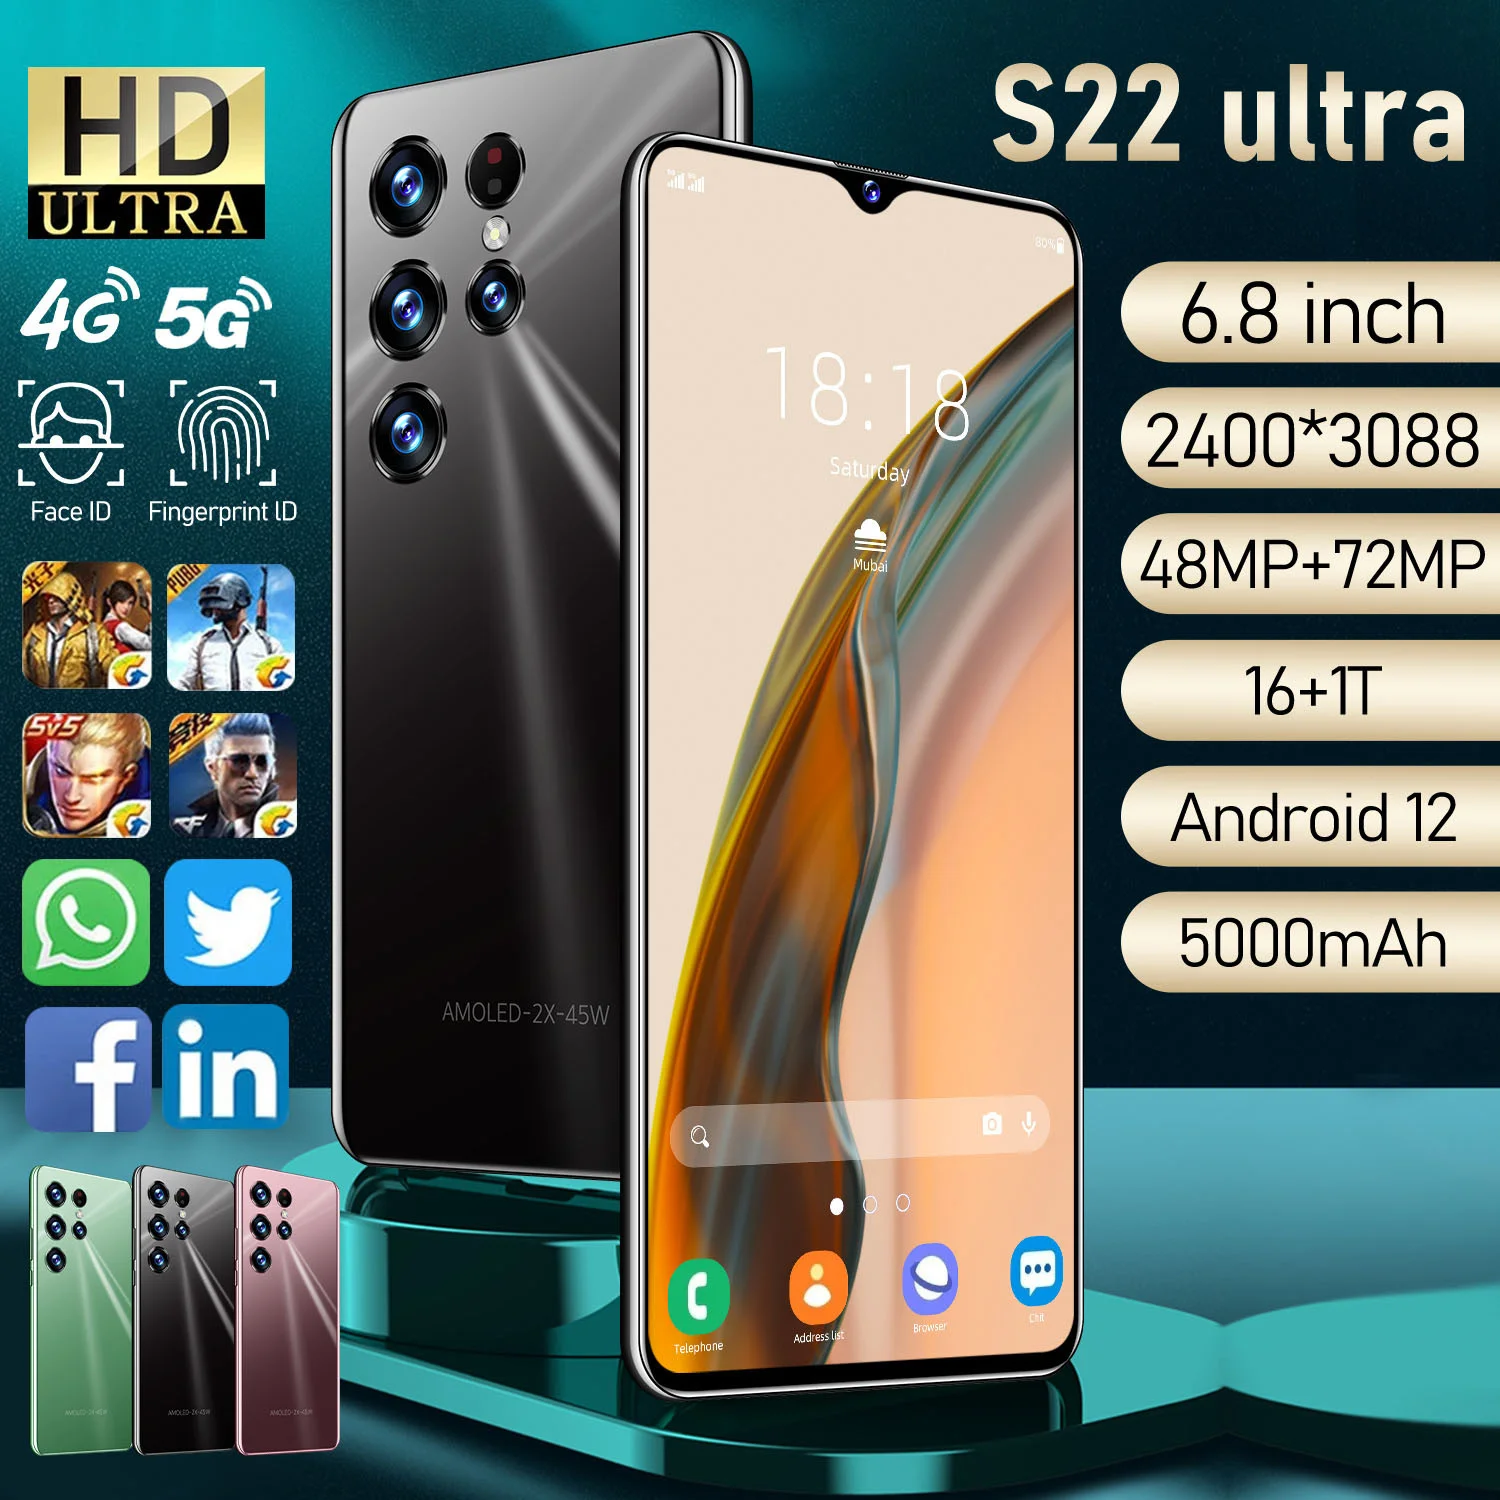 S22 ultra 6.8-inch smartphone 1g + 8g low price